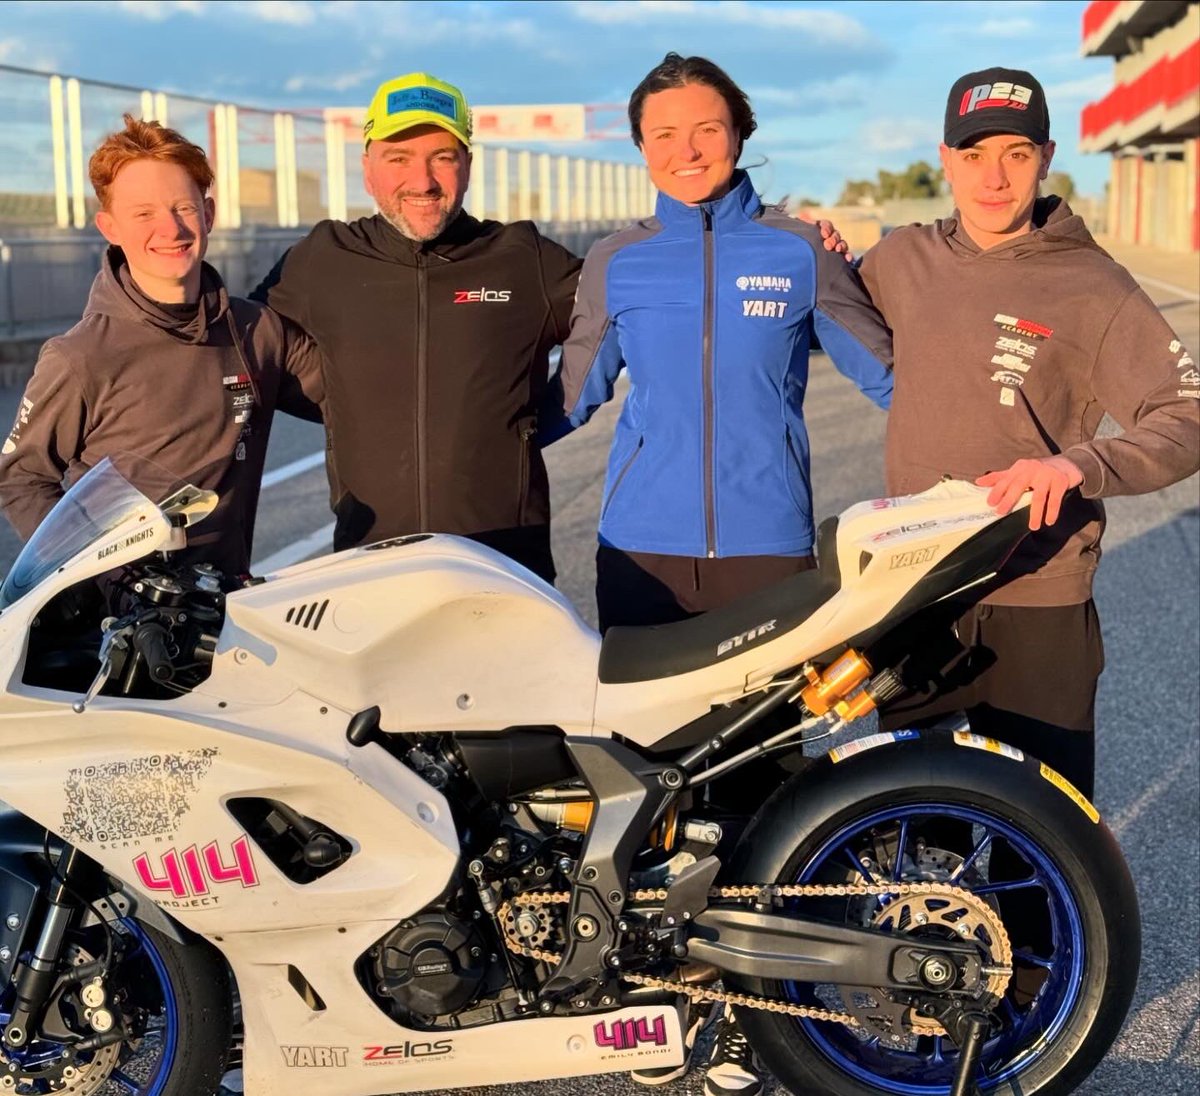 About last week #photodump ! 5 Days training with Emily Bondi + 3 days coaching with young riders from the Belgian Motorcycle Academy Lorenzo Pontillo & Tom Rolin + 2 days with ZELOS rider @BarryBaltus at the last pre season test before the 2024 MotoGP championship✊🏻 #WorldWCR